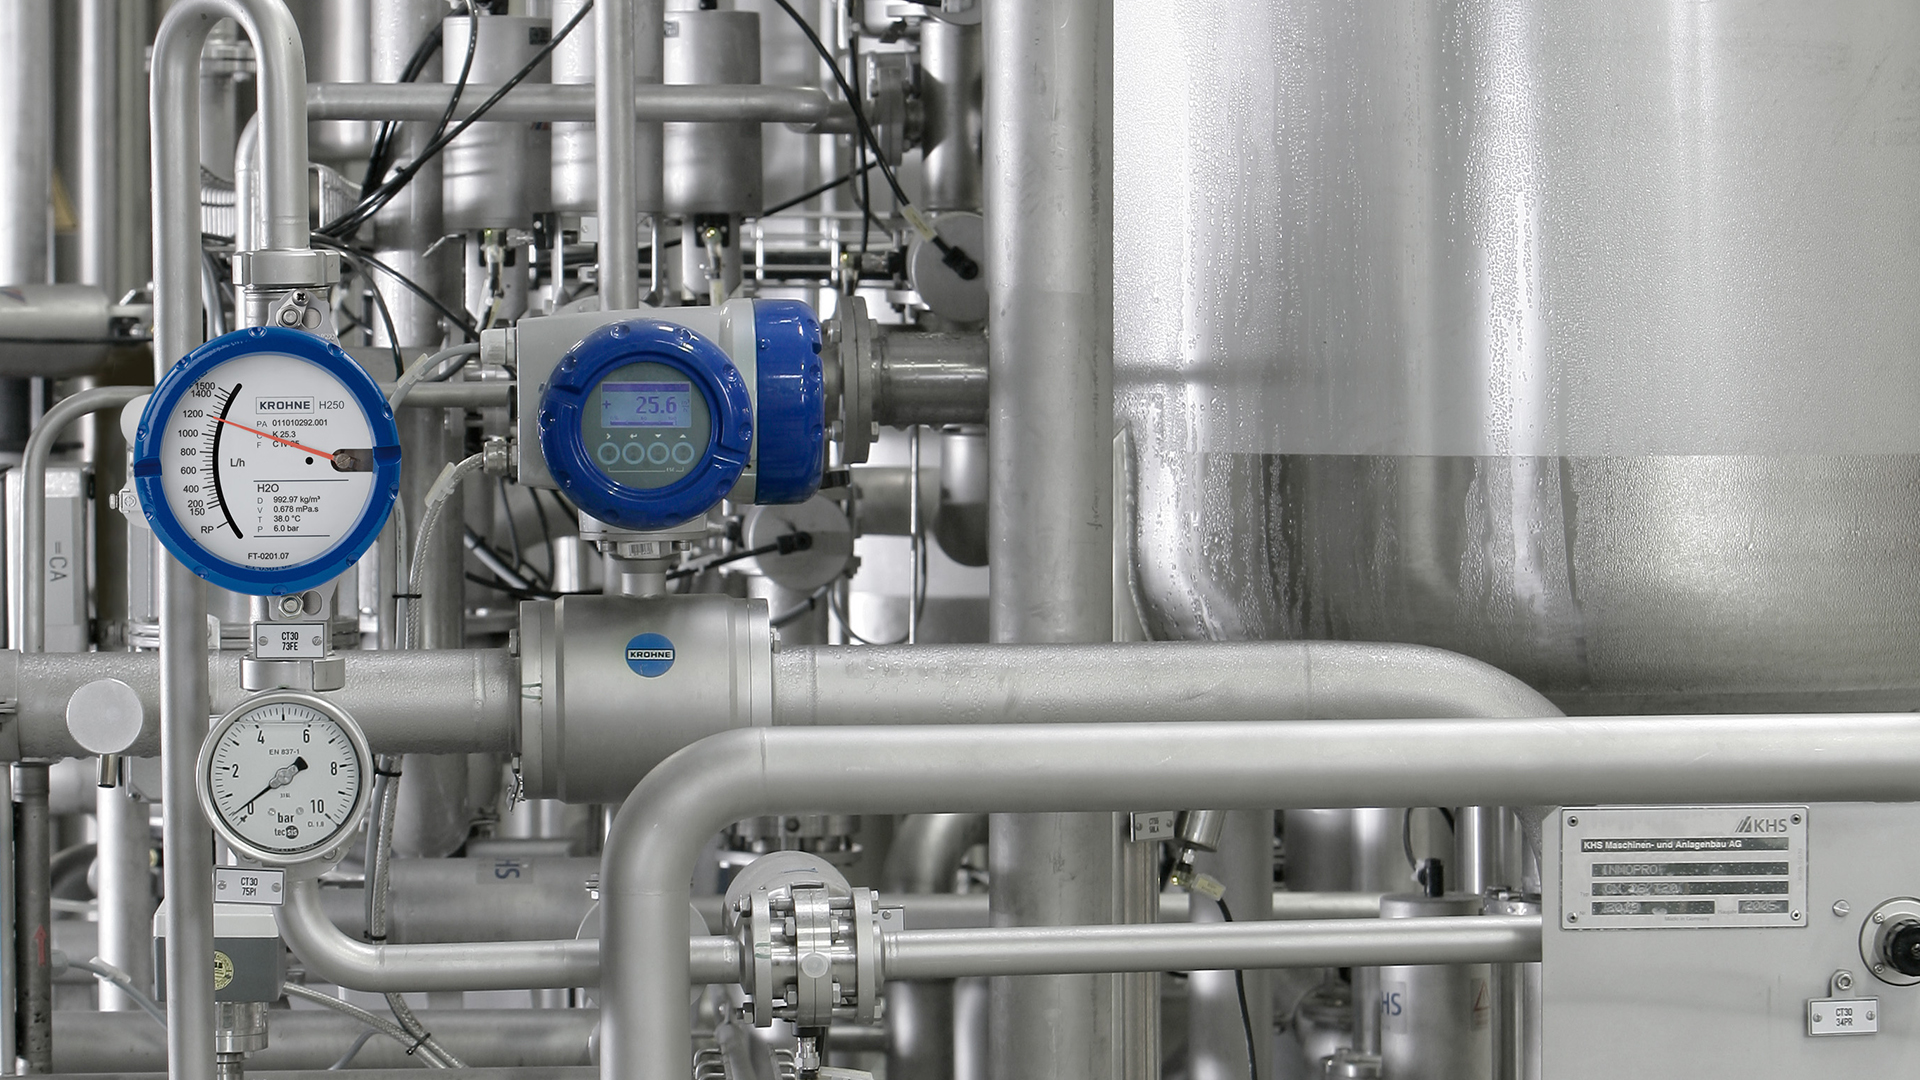 The variable area flowmeter H250 M40 in an industrial application